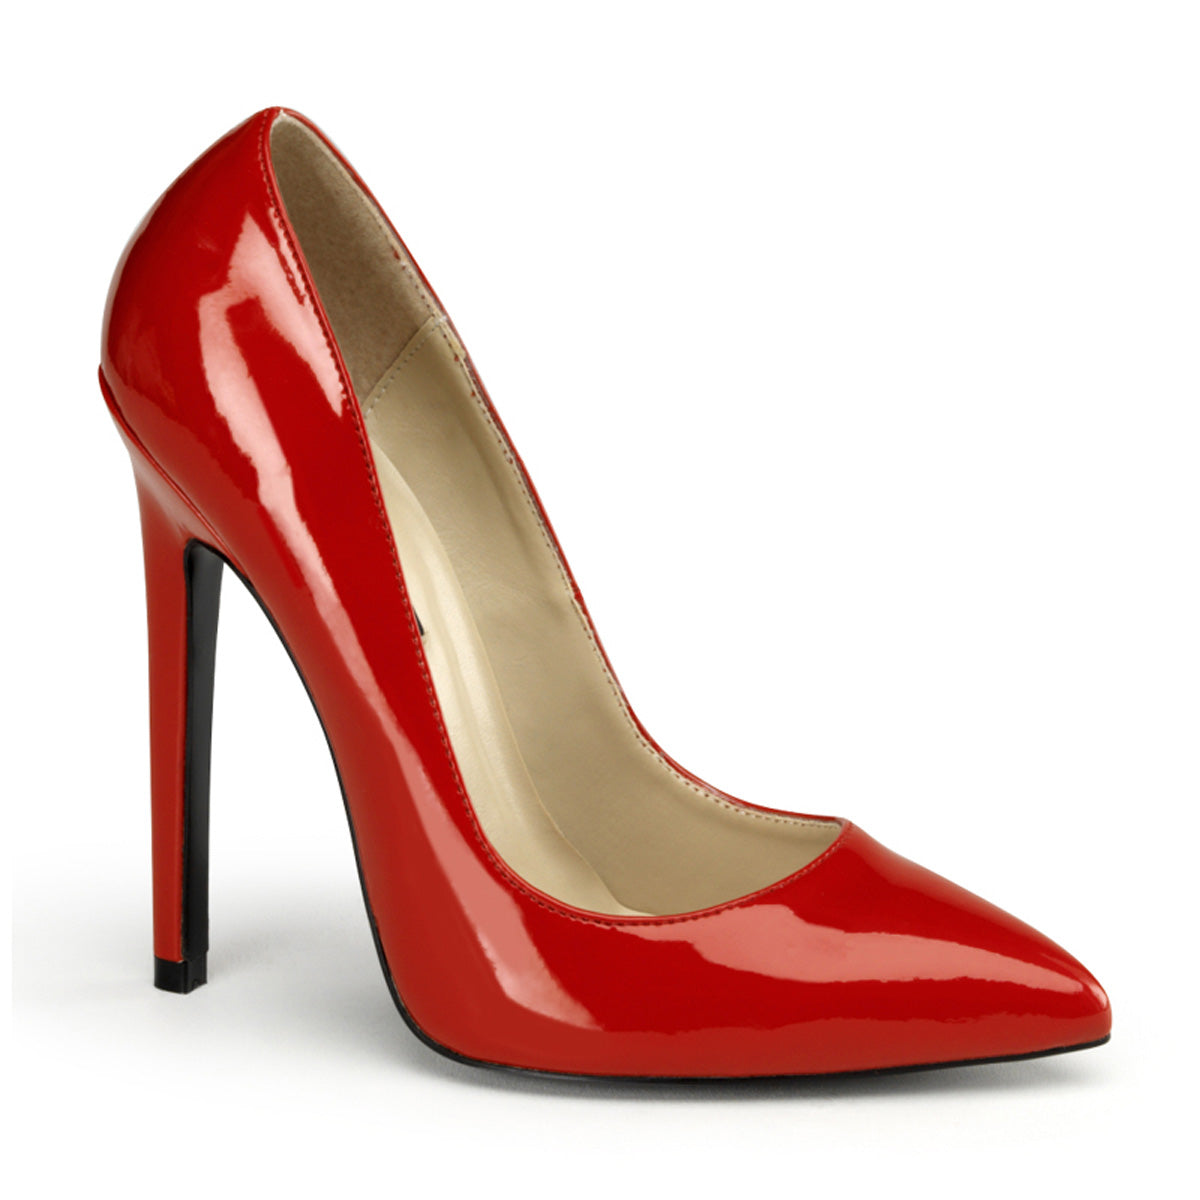 SEXY-20 Pleasers Shoes 5 Inch Heel Red Fetish Footwear